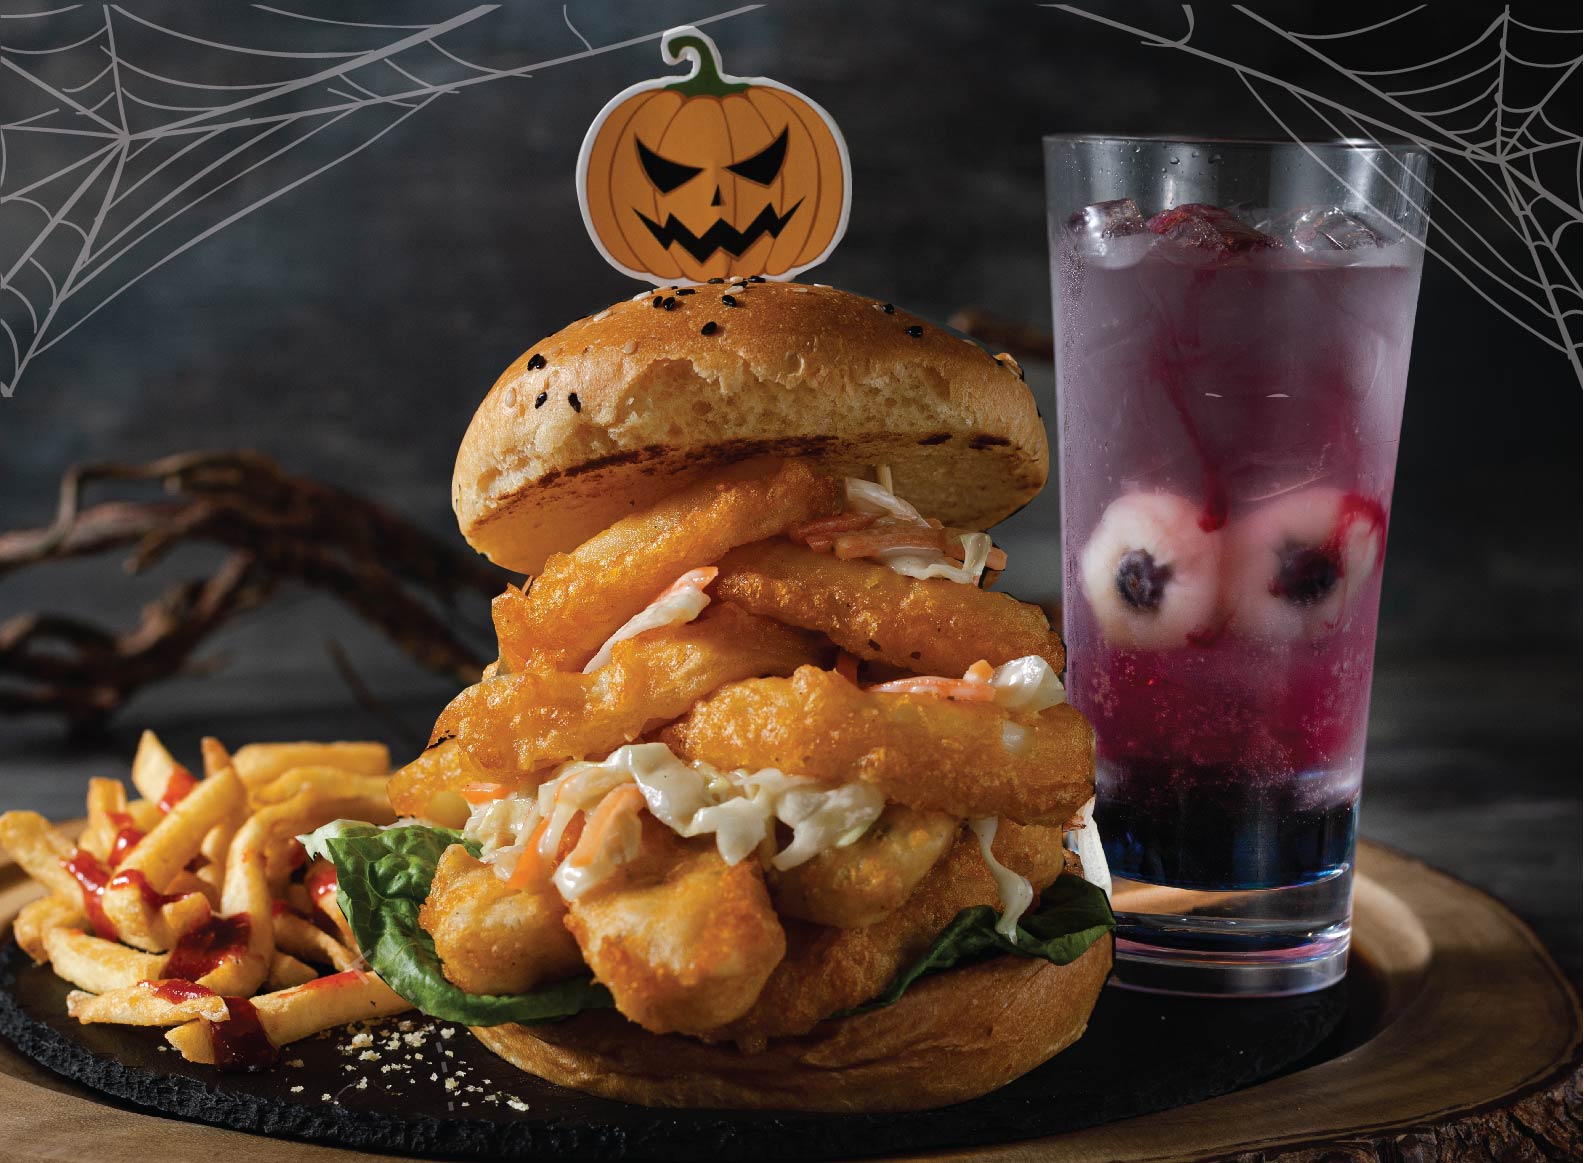 Spooky Halloween with The Manhattan Fish Market